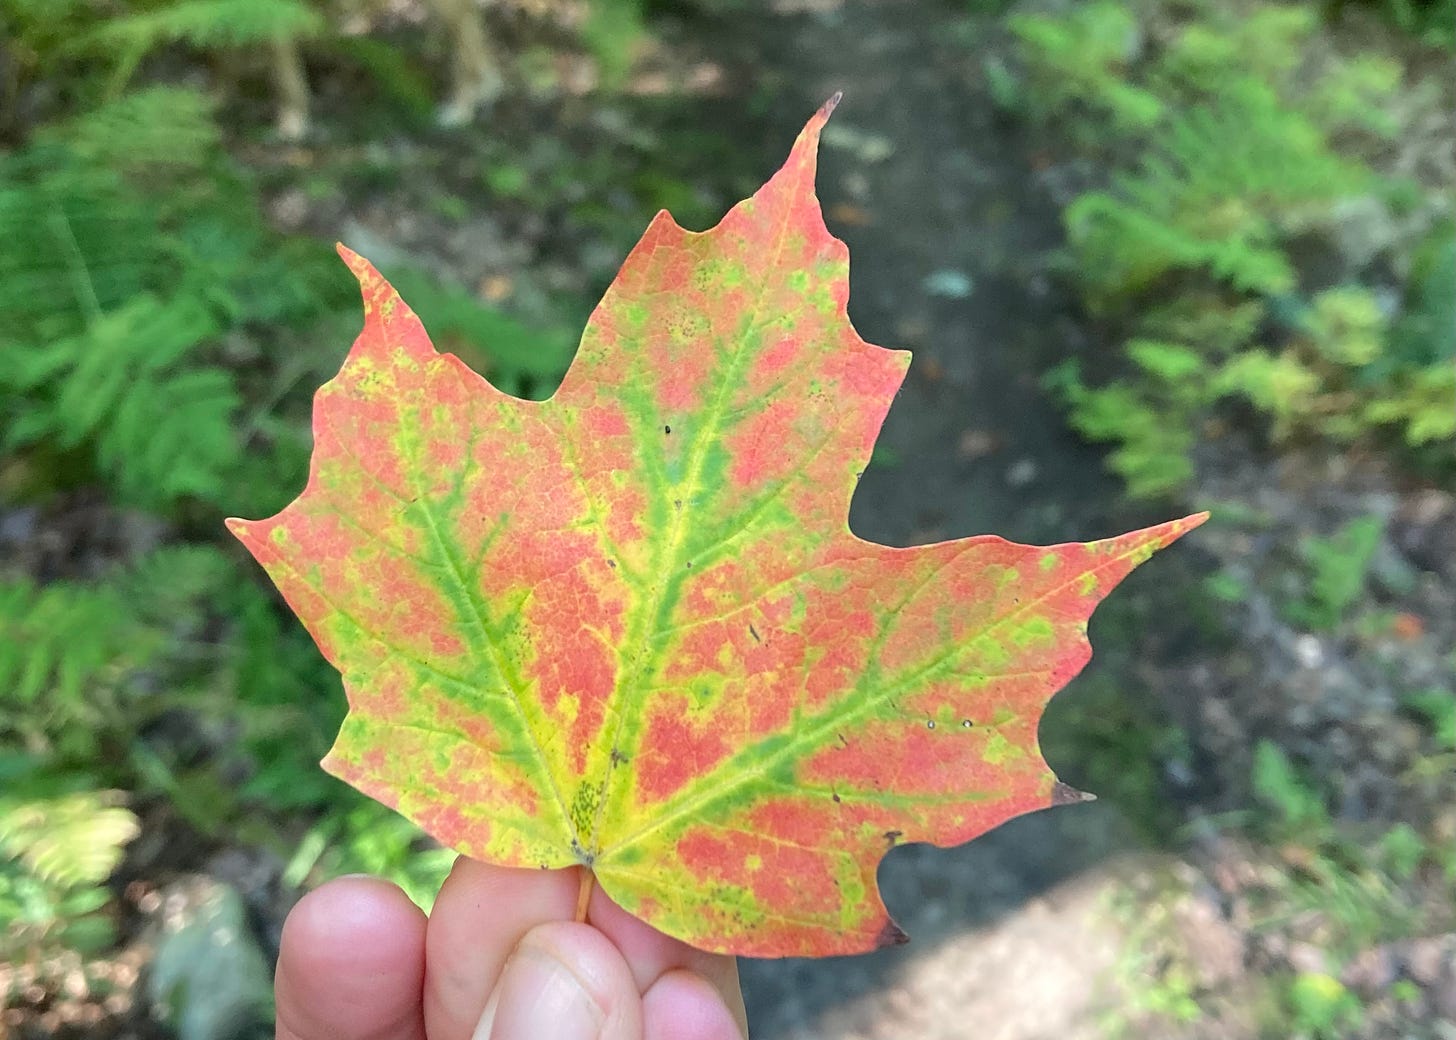 a close up of a fall maple leaf: orange and red, with green veins.